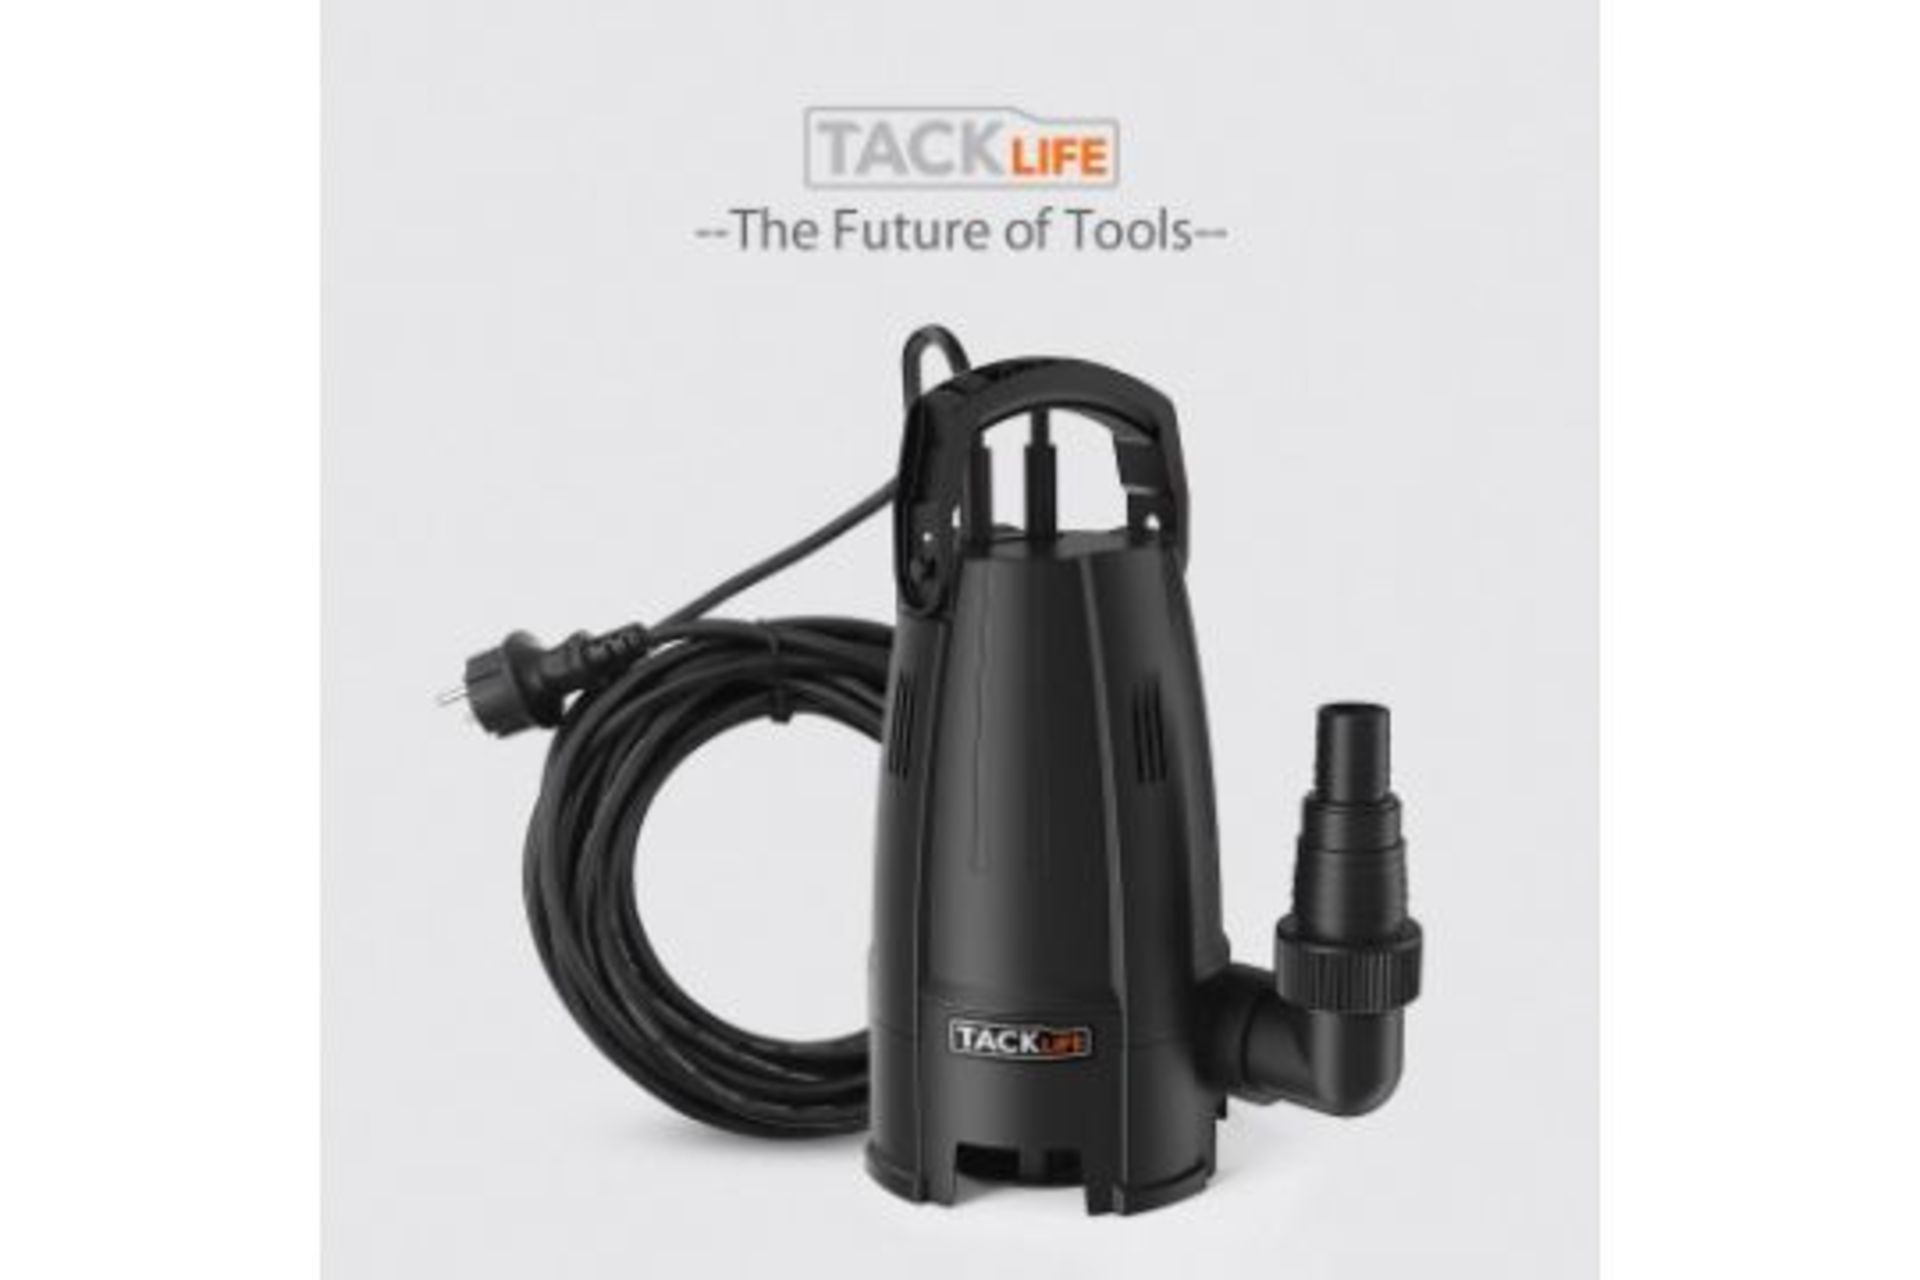 2 X NEW BOXED Tacklife GSUP2B 400W Corded Submersible Utility Water Pump. (ROW 17)